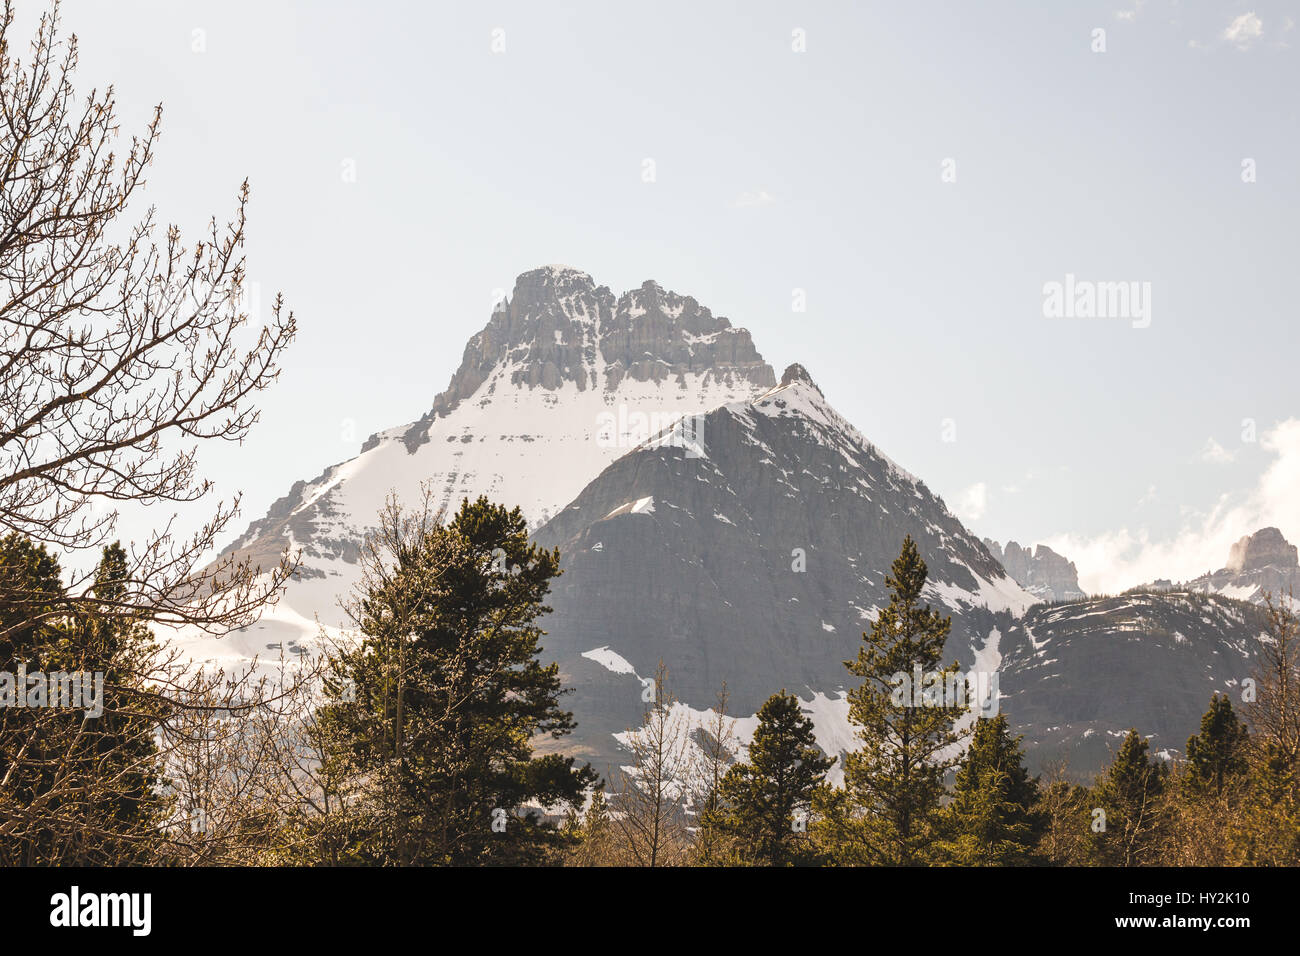 Snowy mountain peaks at Glacier National Park in Montana, USA. Sunny day with blue sky. Stock Photo